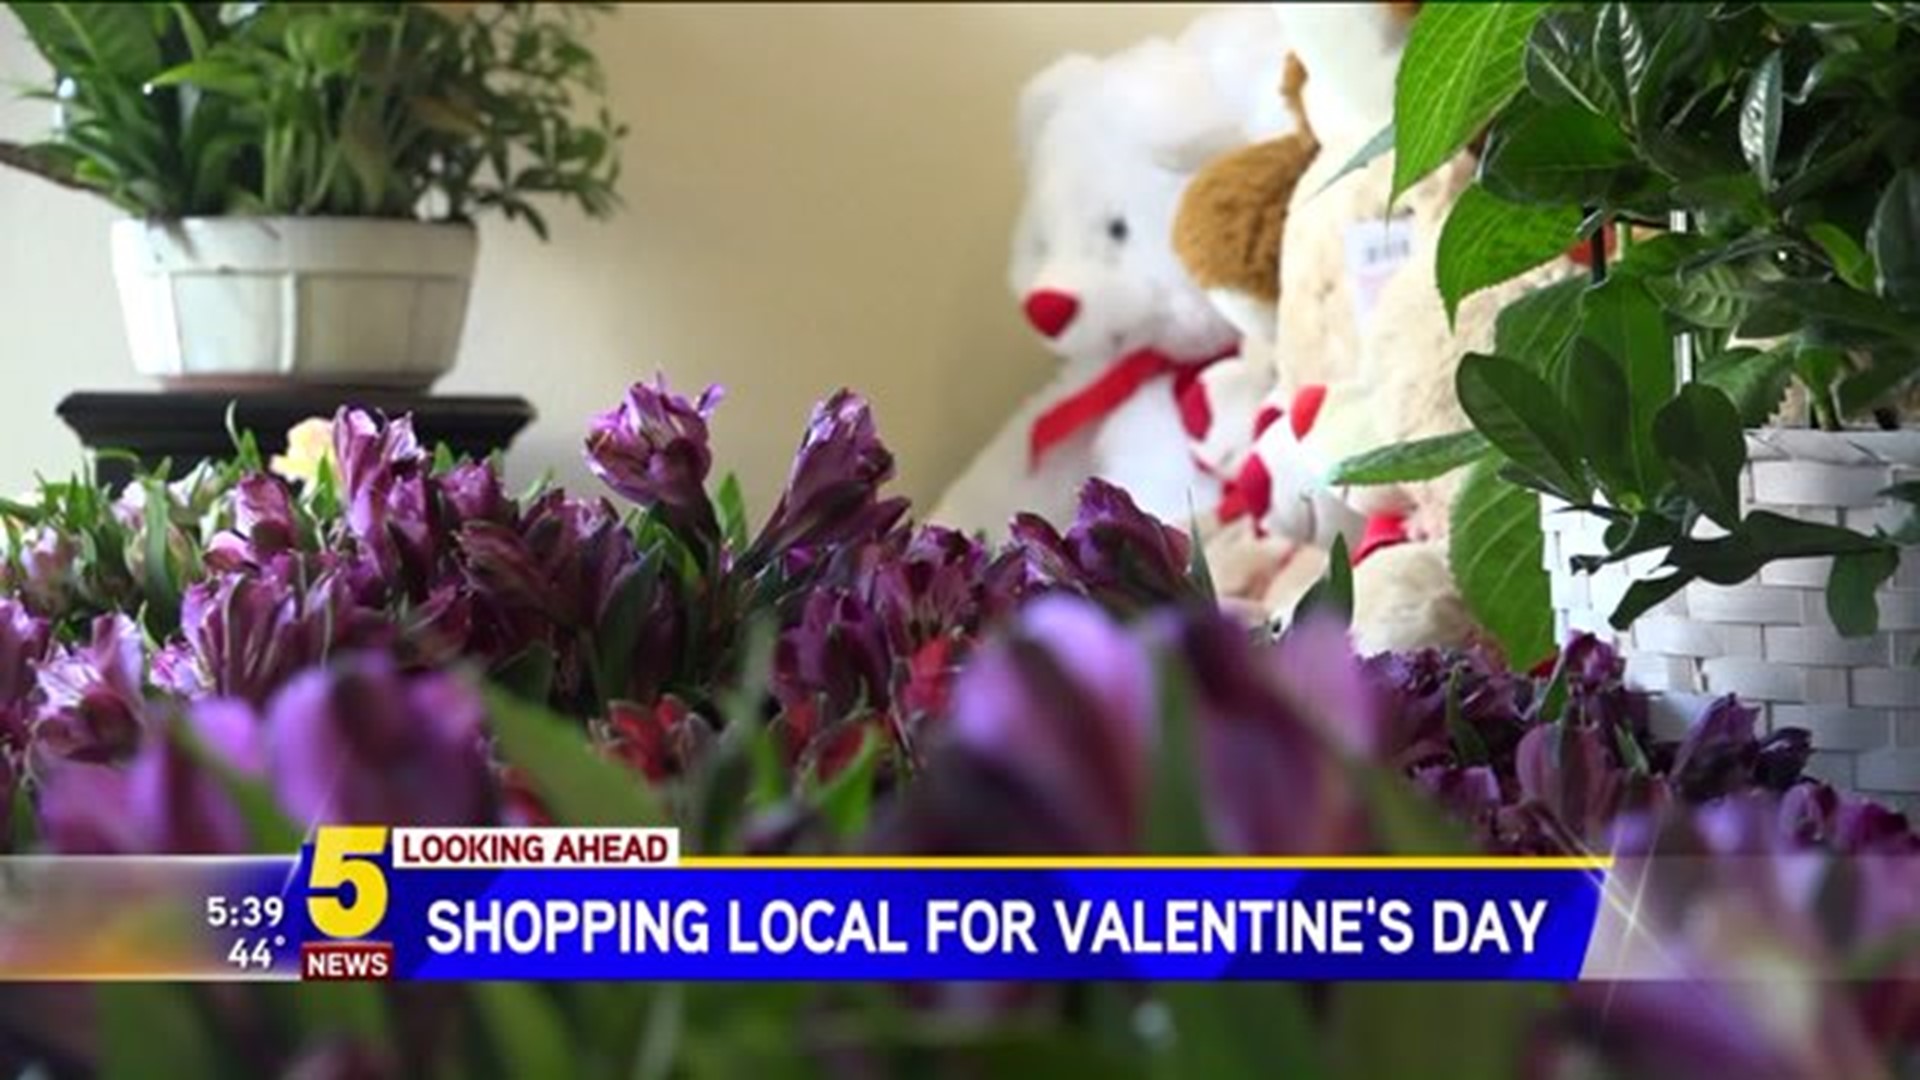 SHOP LOCAL FOR VDAY